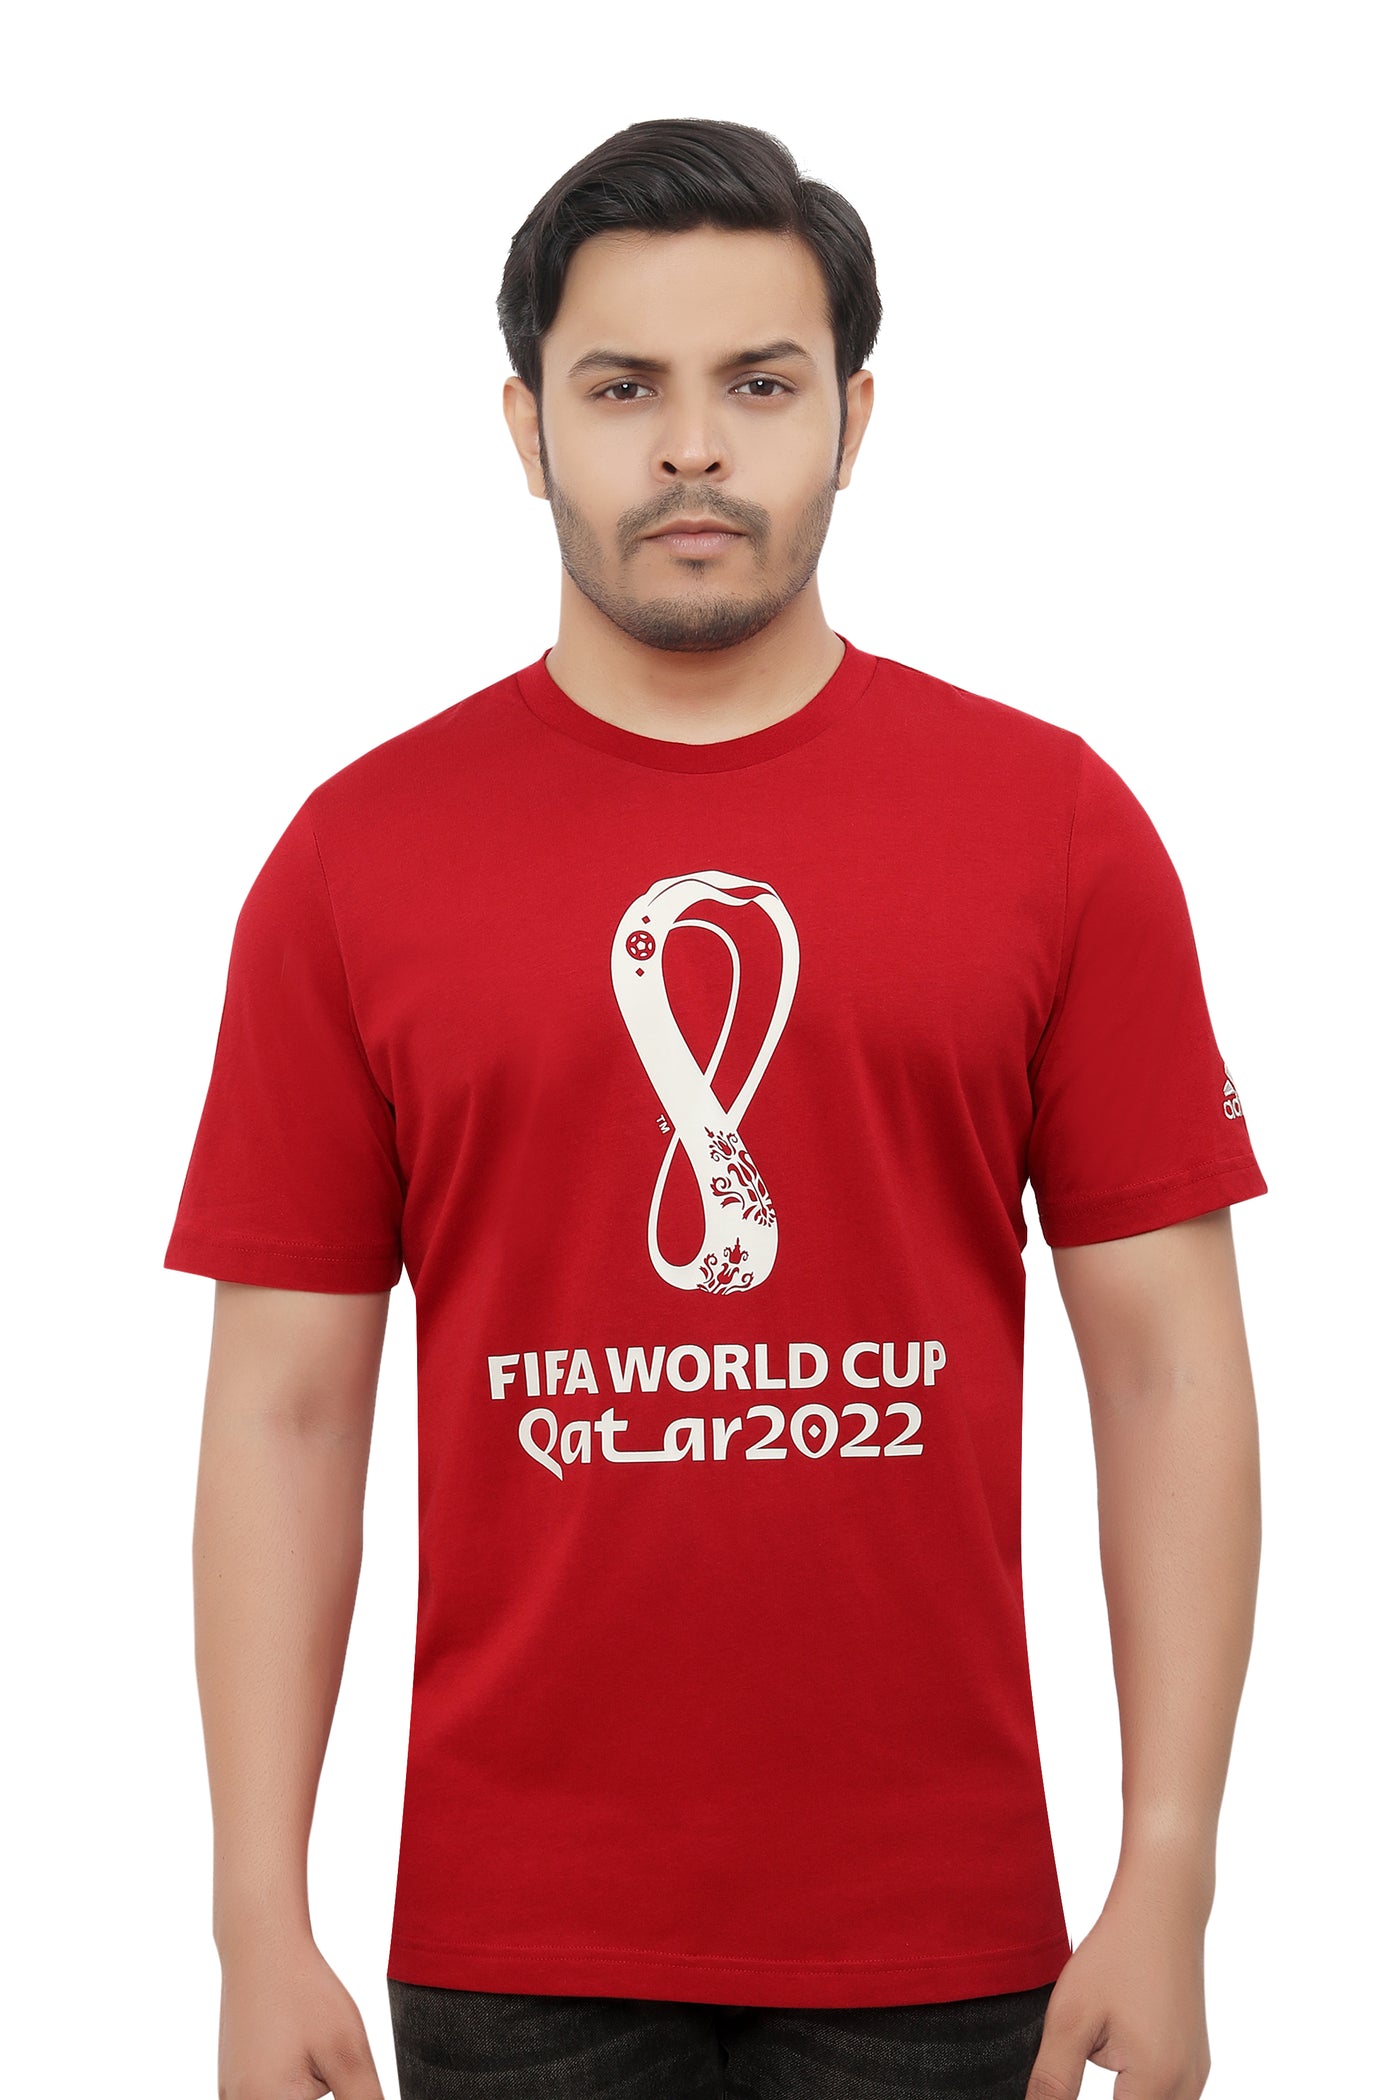 ADIDAS FIFA WORLD CUP 2022 FAN JERSEY - RED